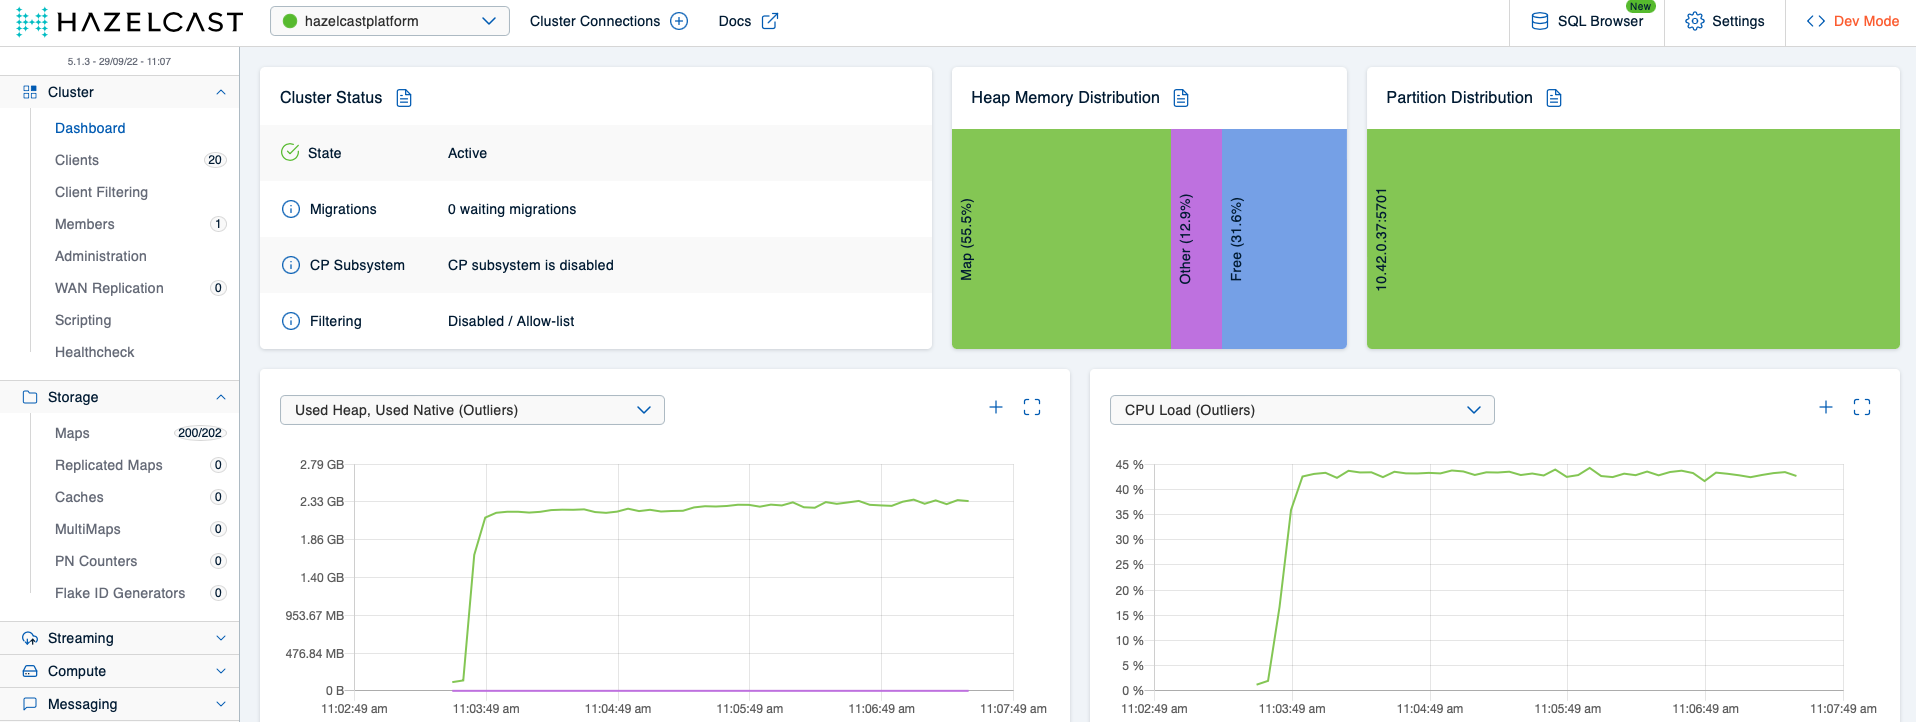 Main view of the mancenter with 10 Hazeltest instances generating load.